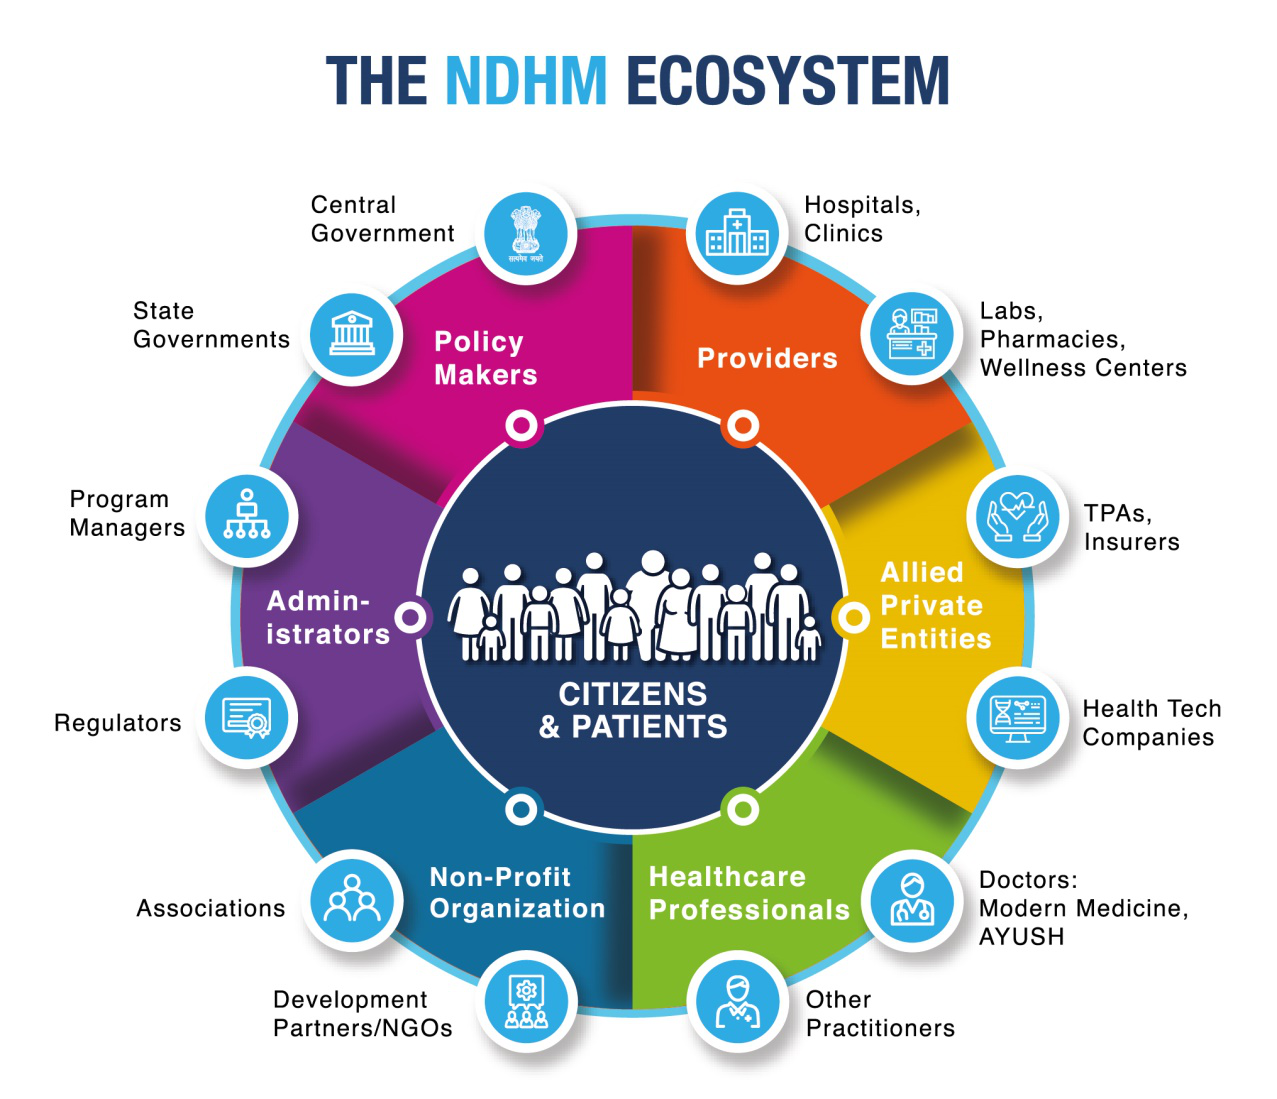 The NDHM ecosystem